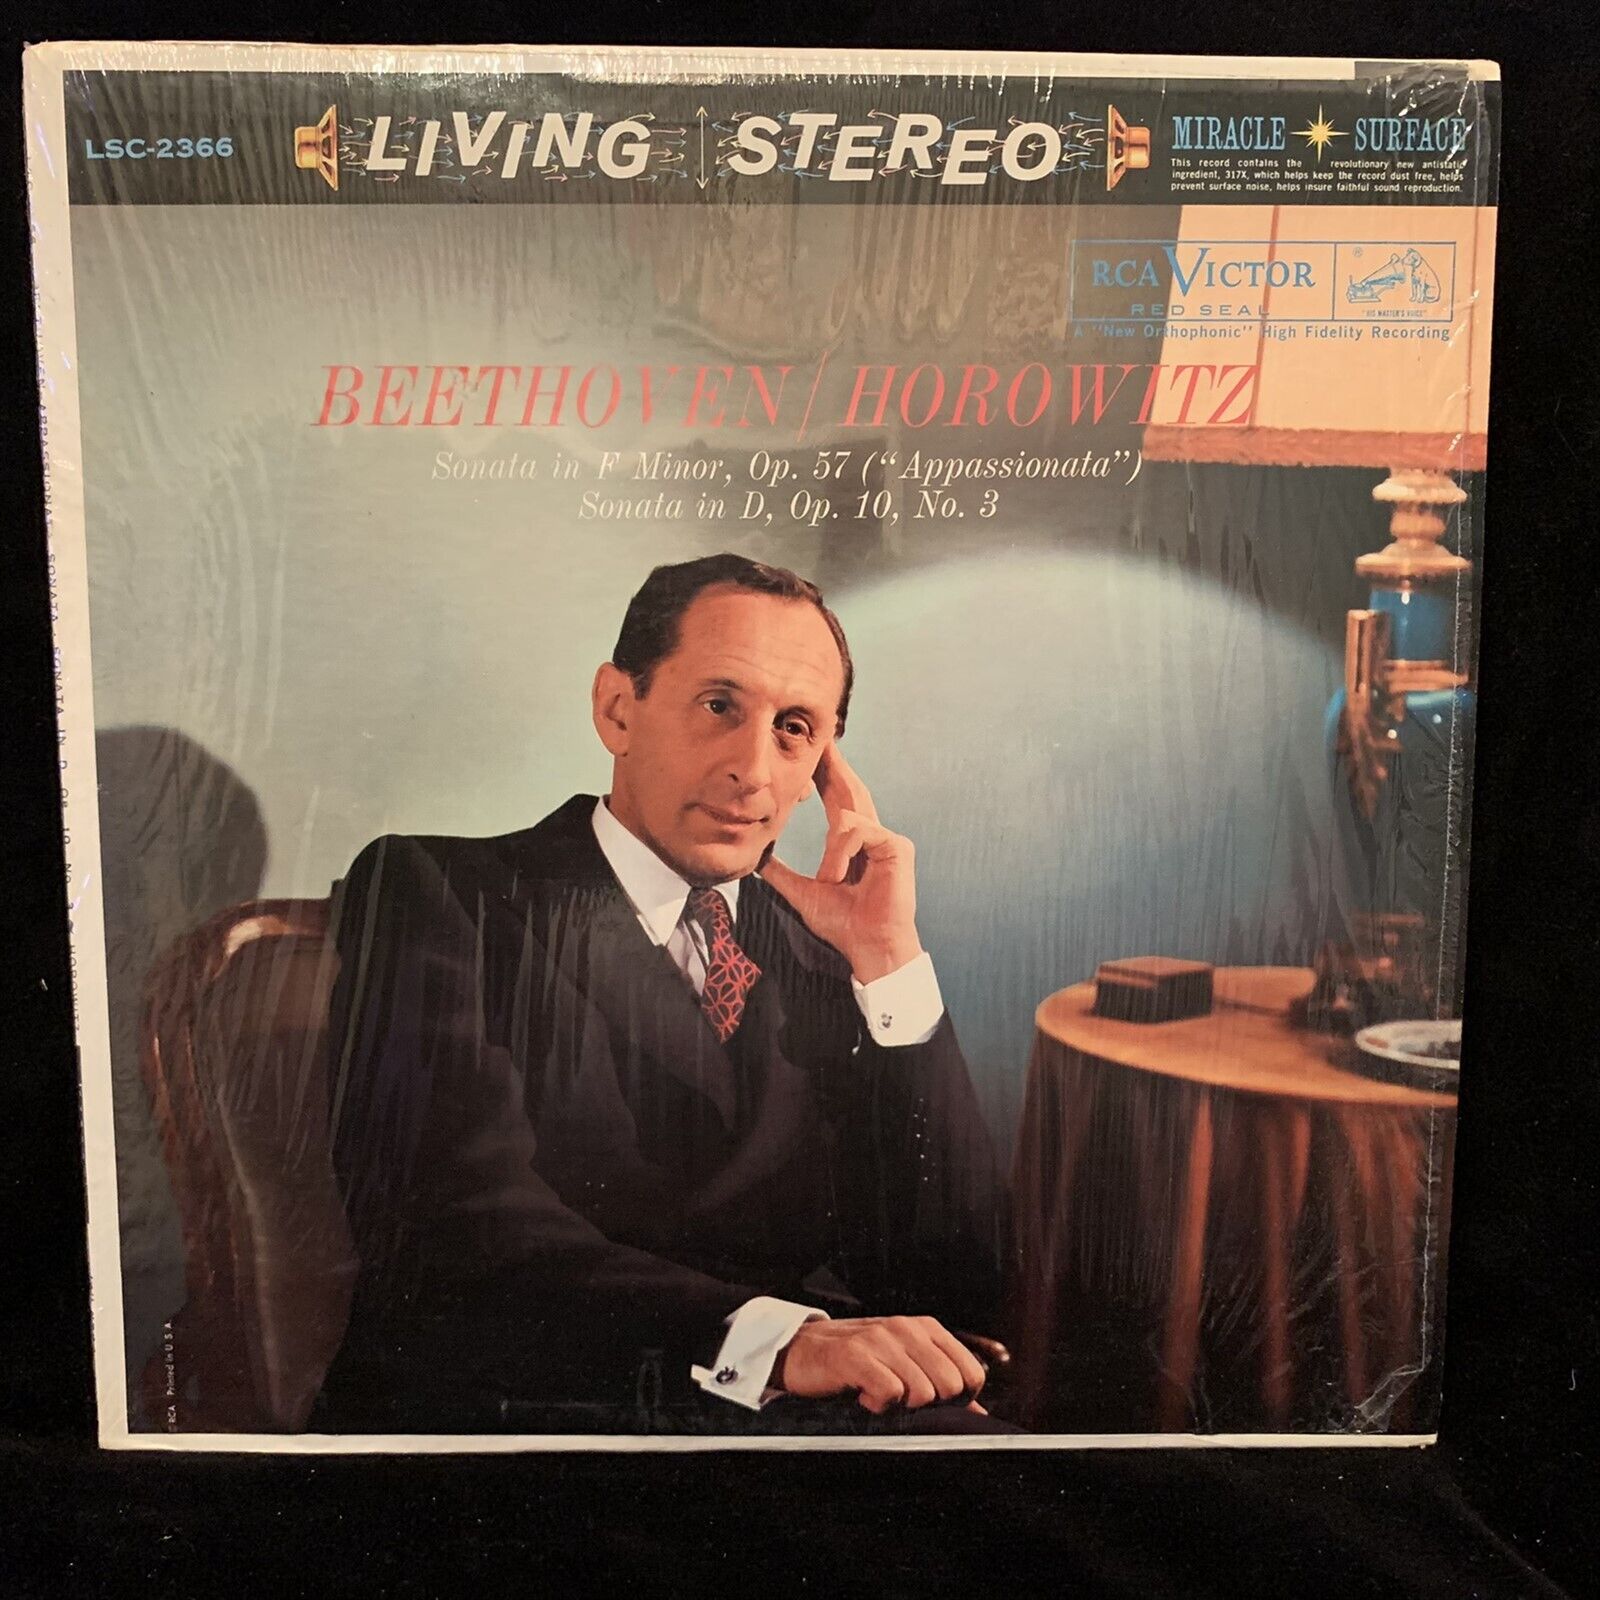 RCA Living Stereo LSC-2366 BEETHOVEN Piano Sonatas - HOROWITZ - ST LP IN SHRINK